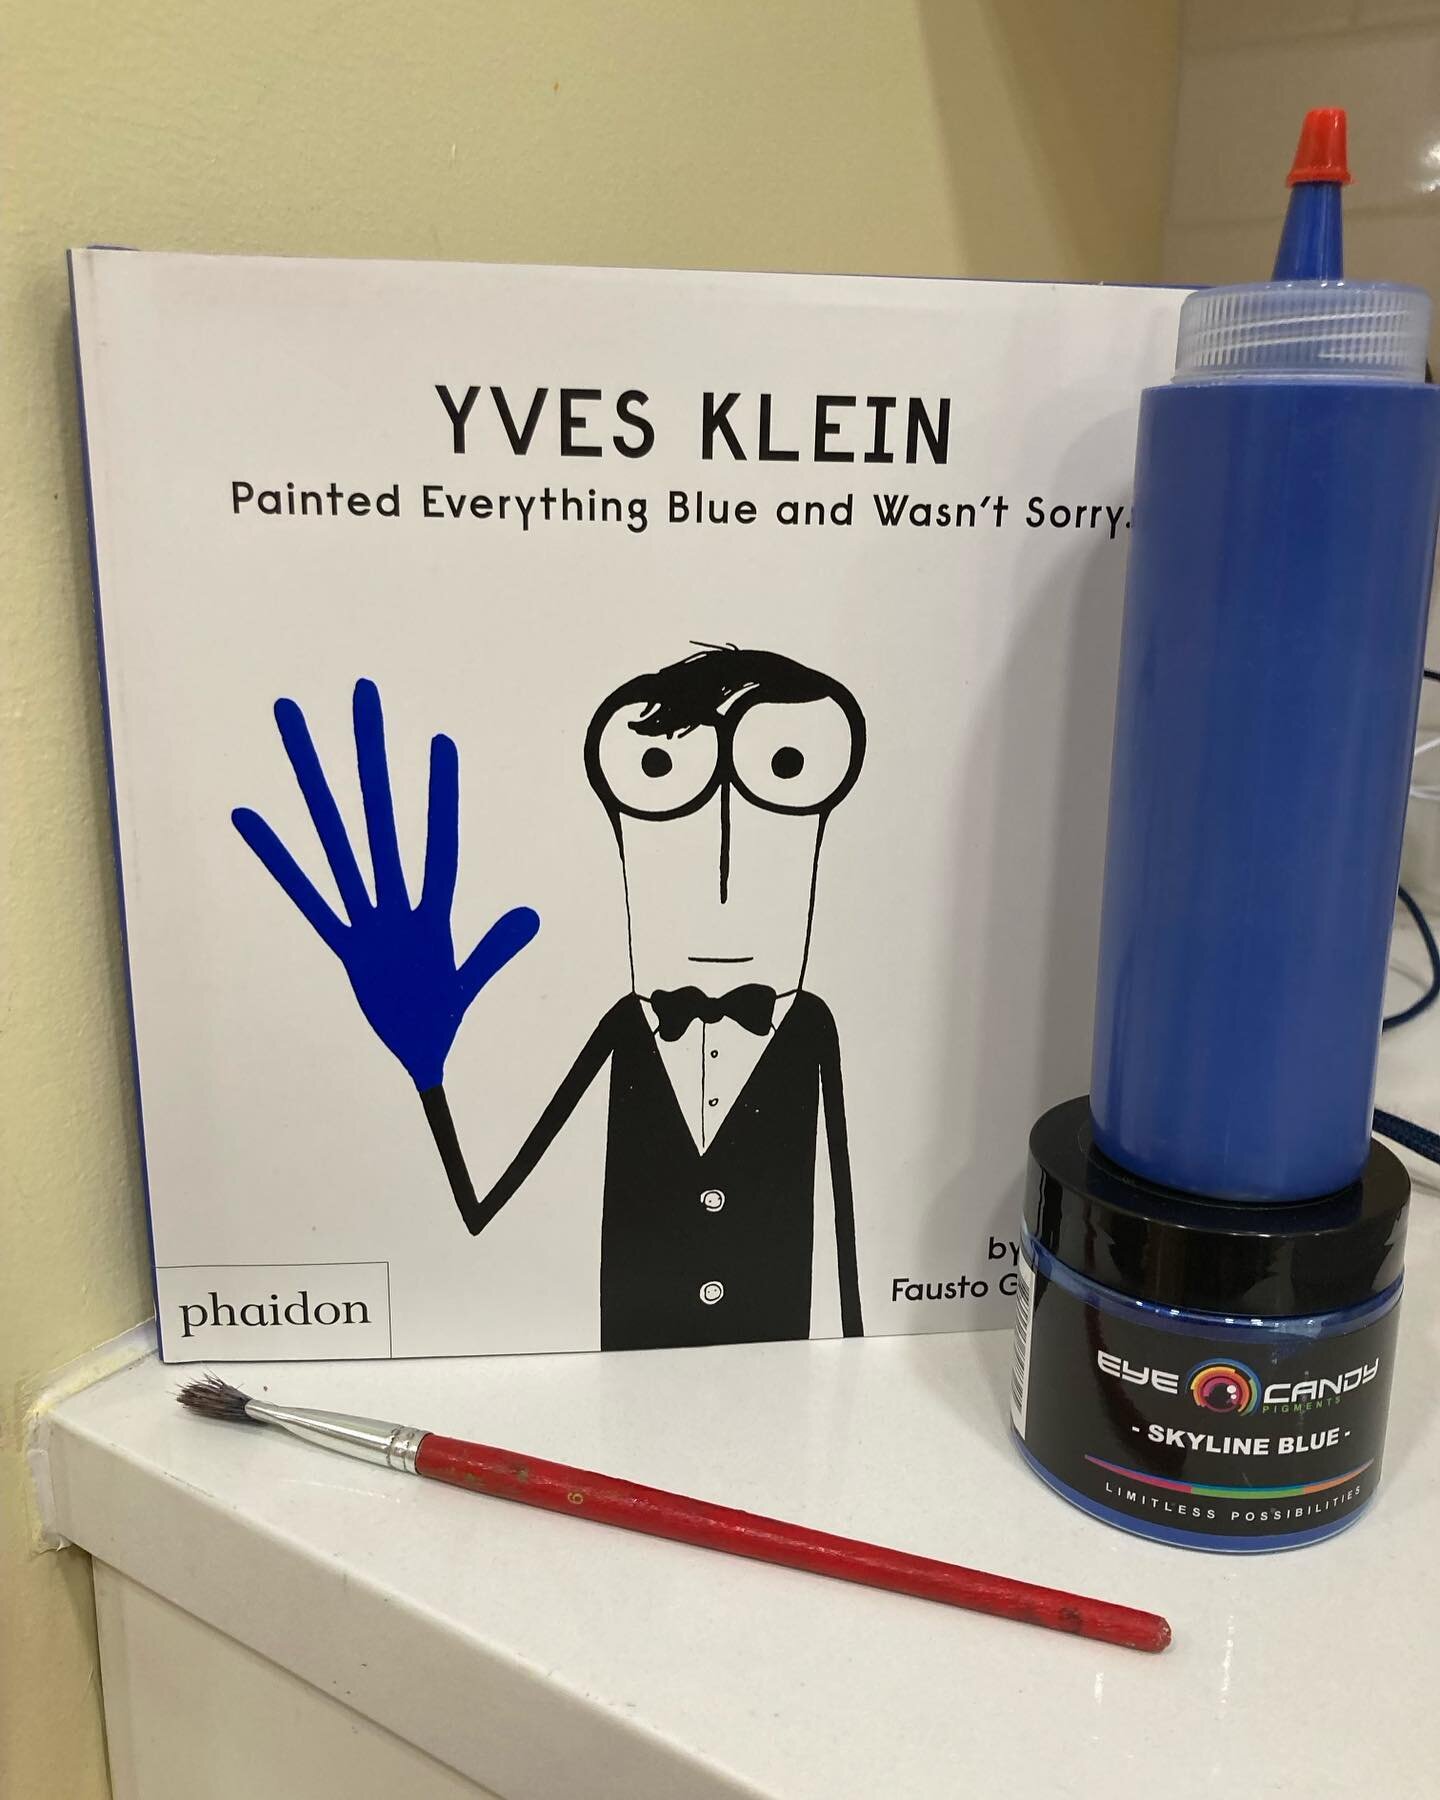 Our featured artist at camp this week was Yves Klein, a French artist known for his &ldquo;International Klein Blue&rdquo; monochrome paintings. Our Nursery class mixed their own IKB paint using acrylic medium and pigment powder, then shared it with 